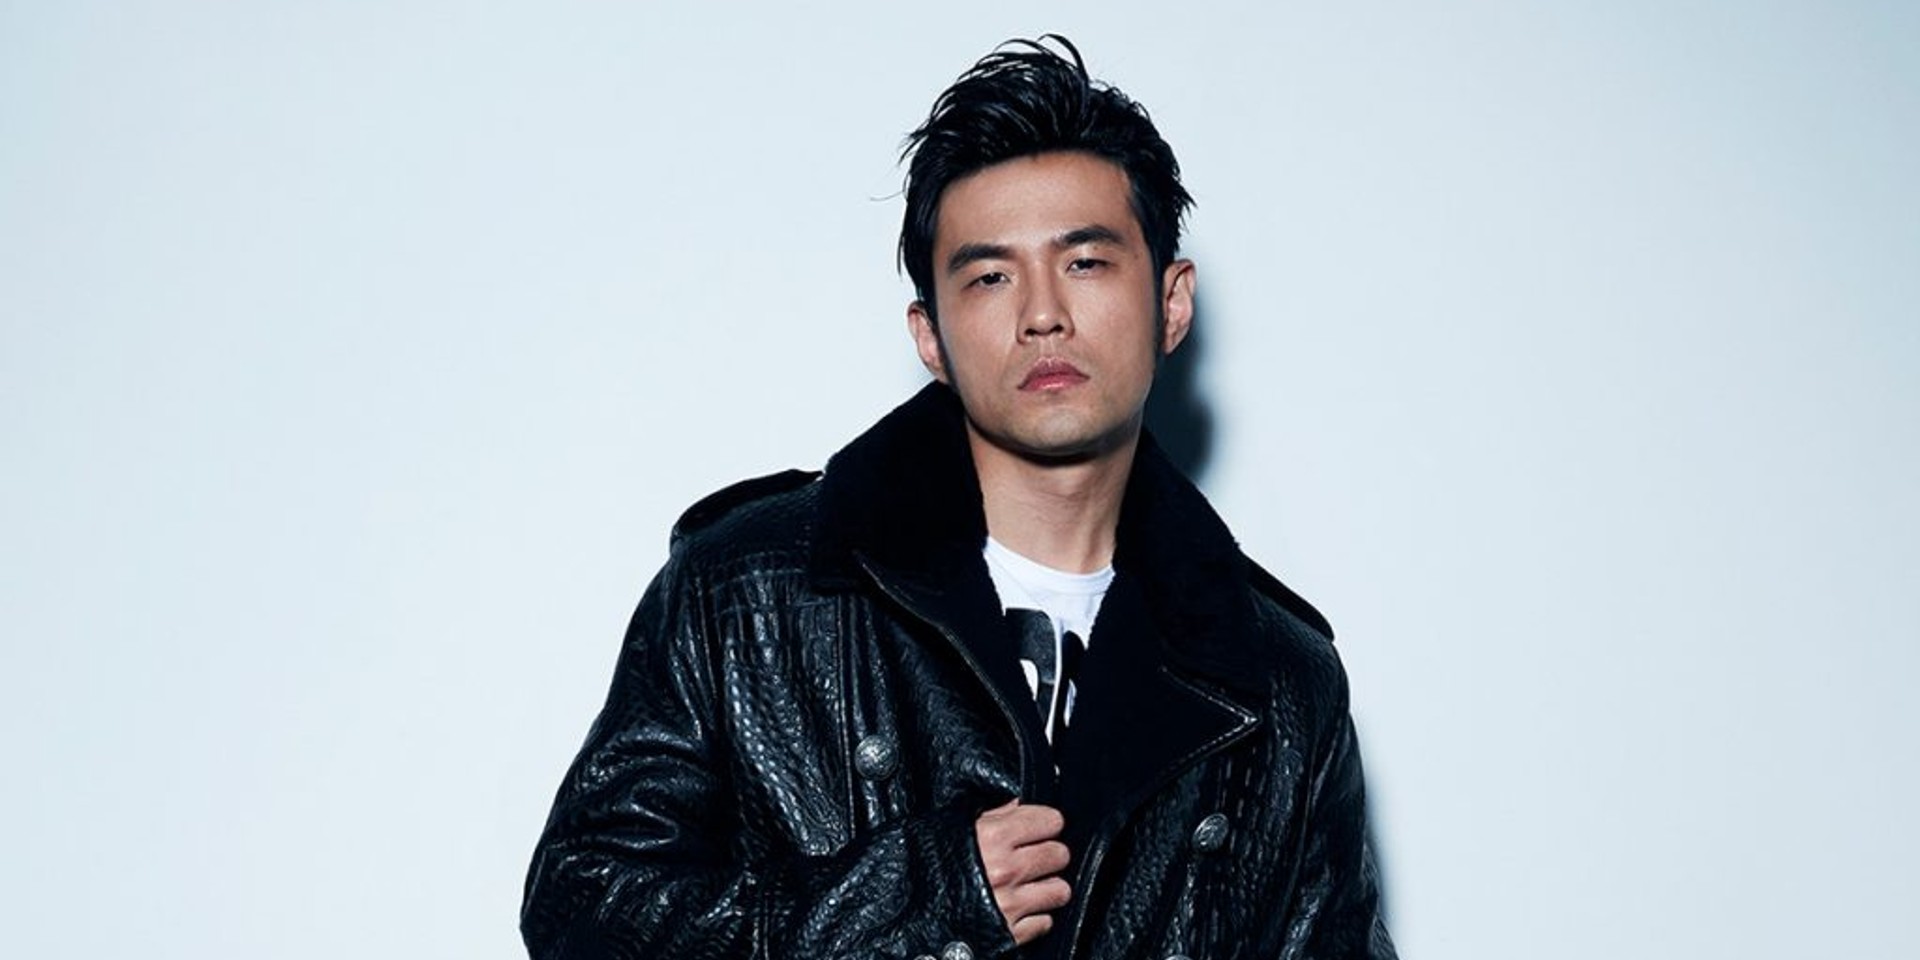 Jay Chou returns to youthful themes with new single on 39th birthday — listen